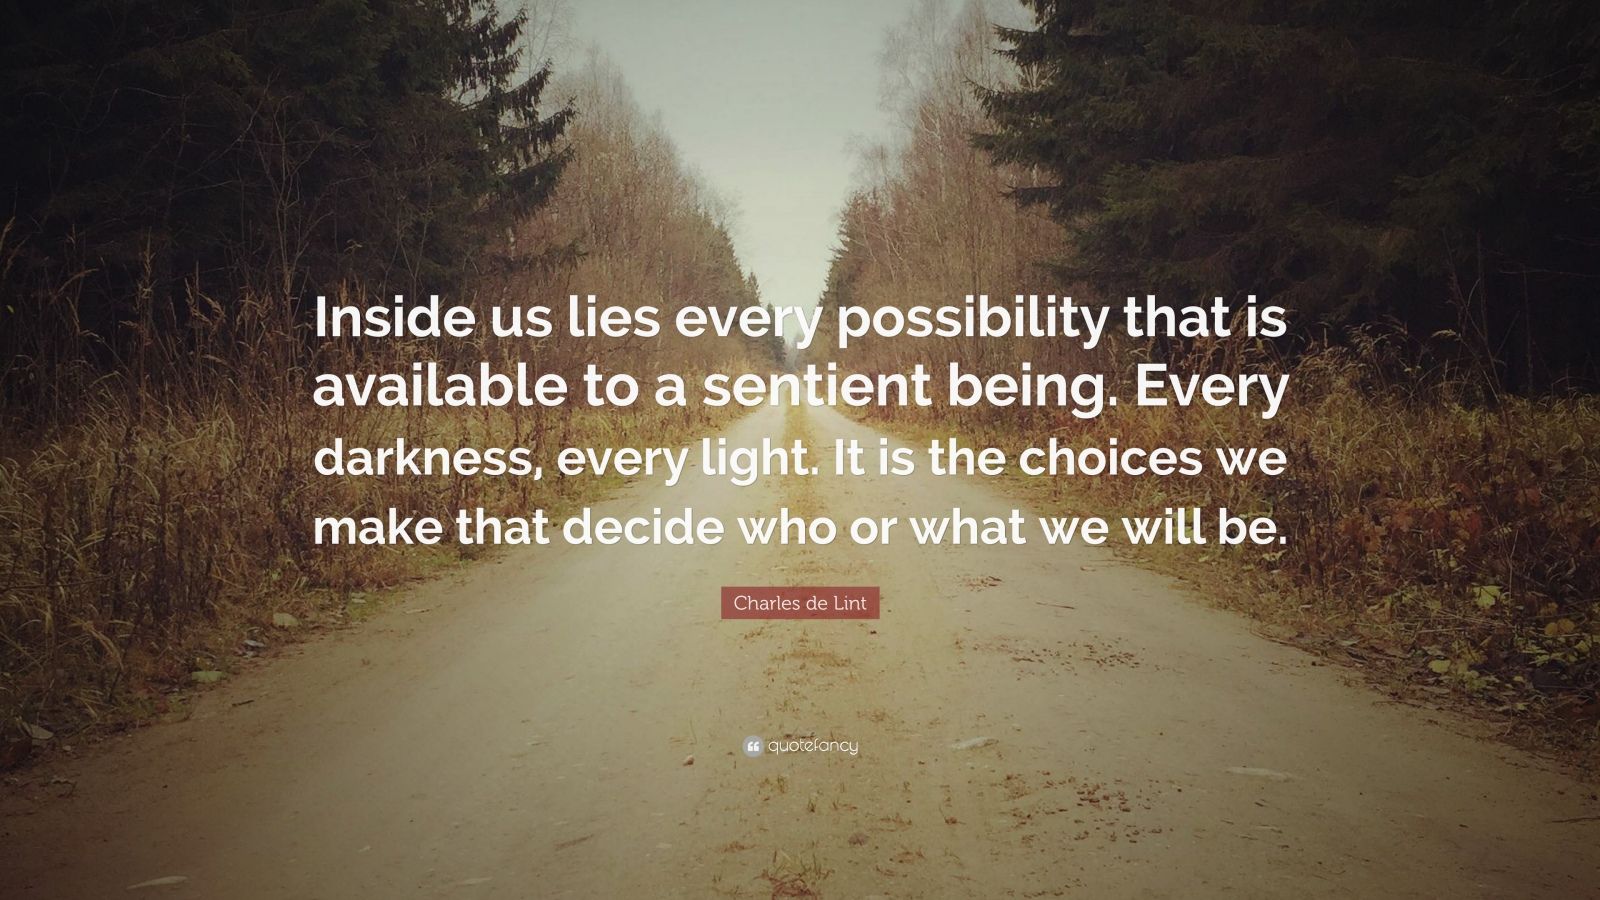 Charles de Lint Quote: “Inside us lies every possibility that is ...